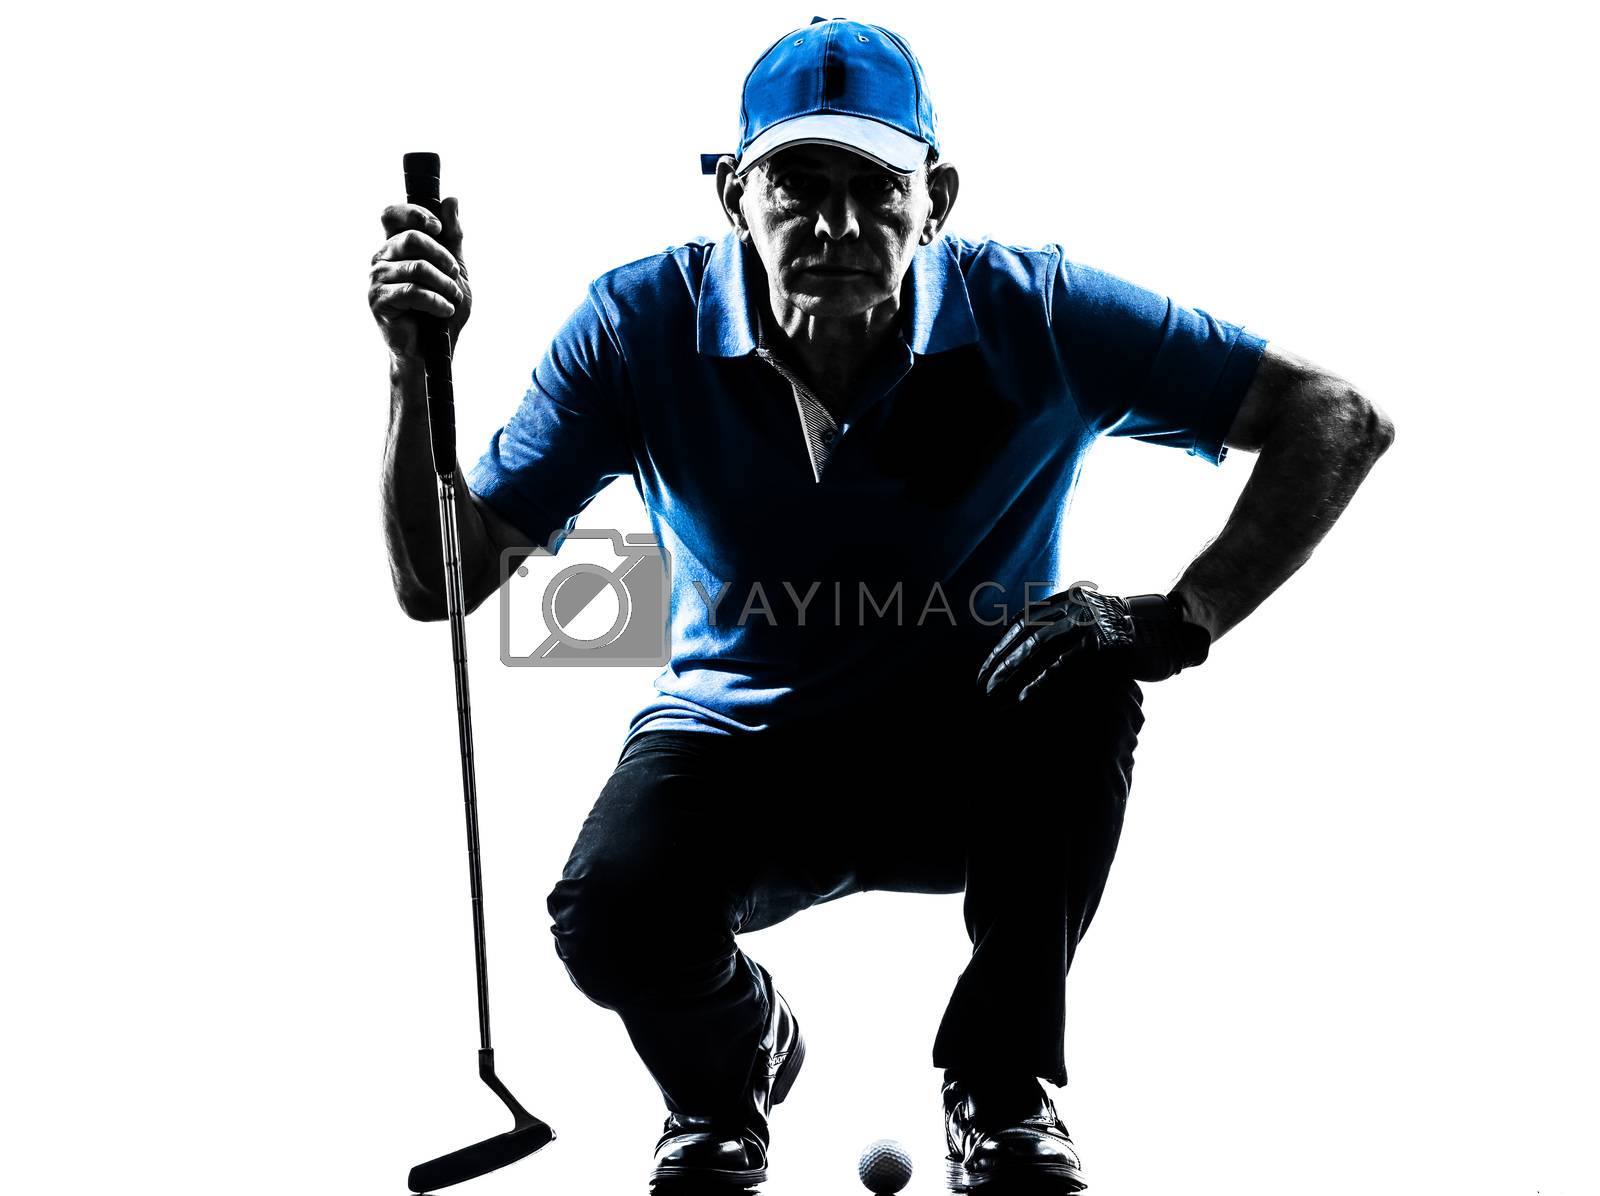 Royalty free image of man golfer golfing crouching silhouette by PIXSTILL